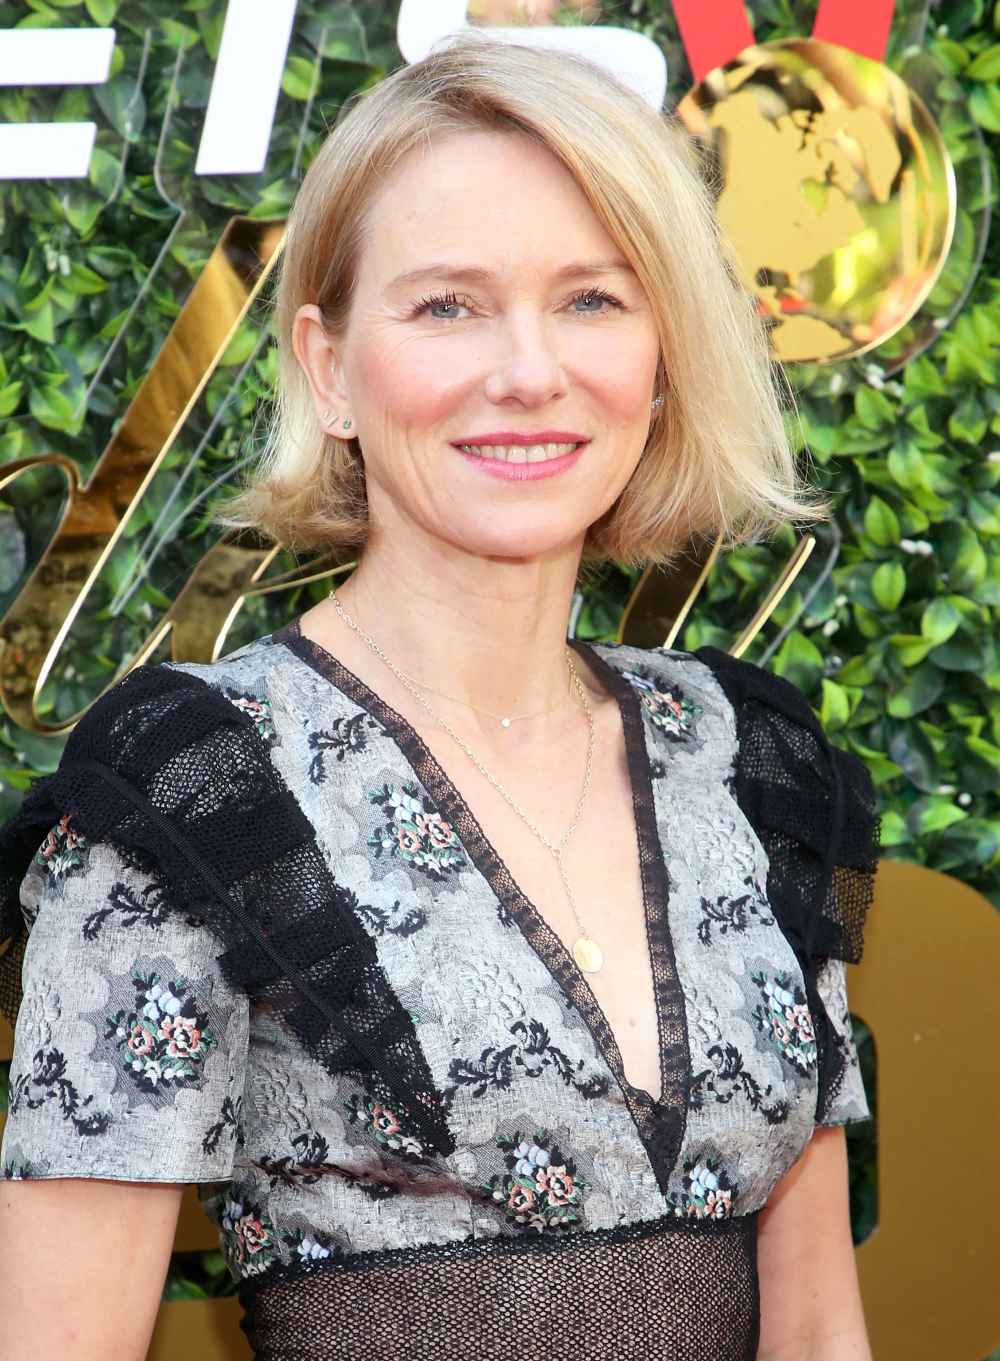 Naomi Watts Spills Skincare Secrets for a Glowing, Youthful Complexion